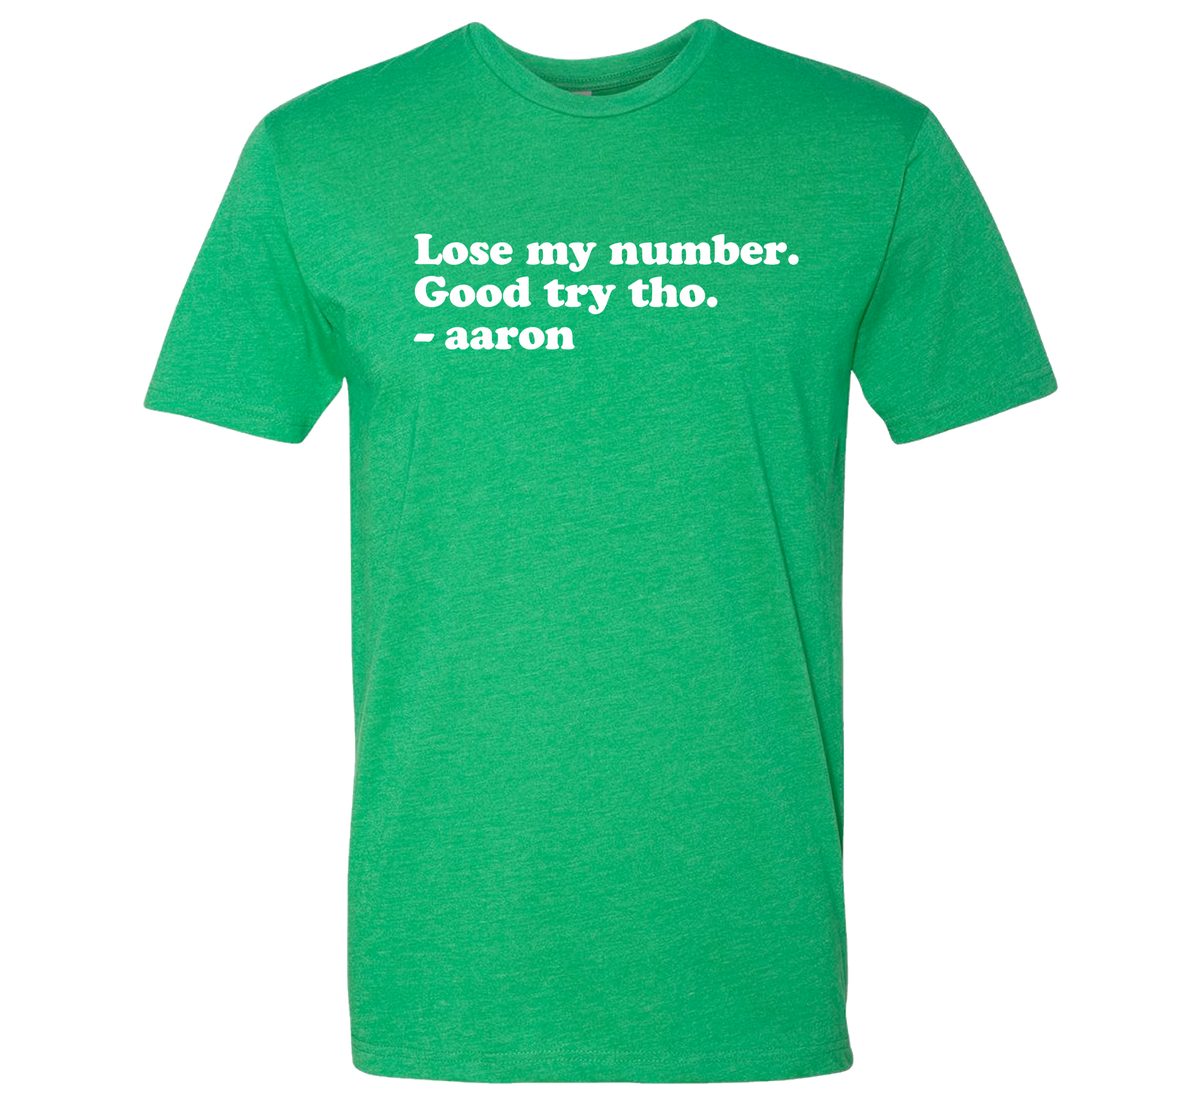 Lose My Number. Good try tho.- aaron T-shirt In The Clutch